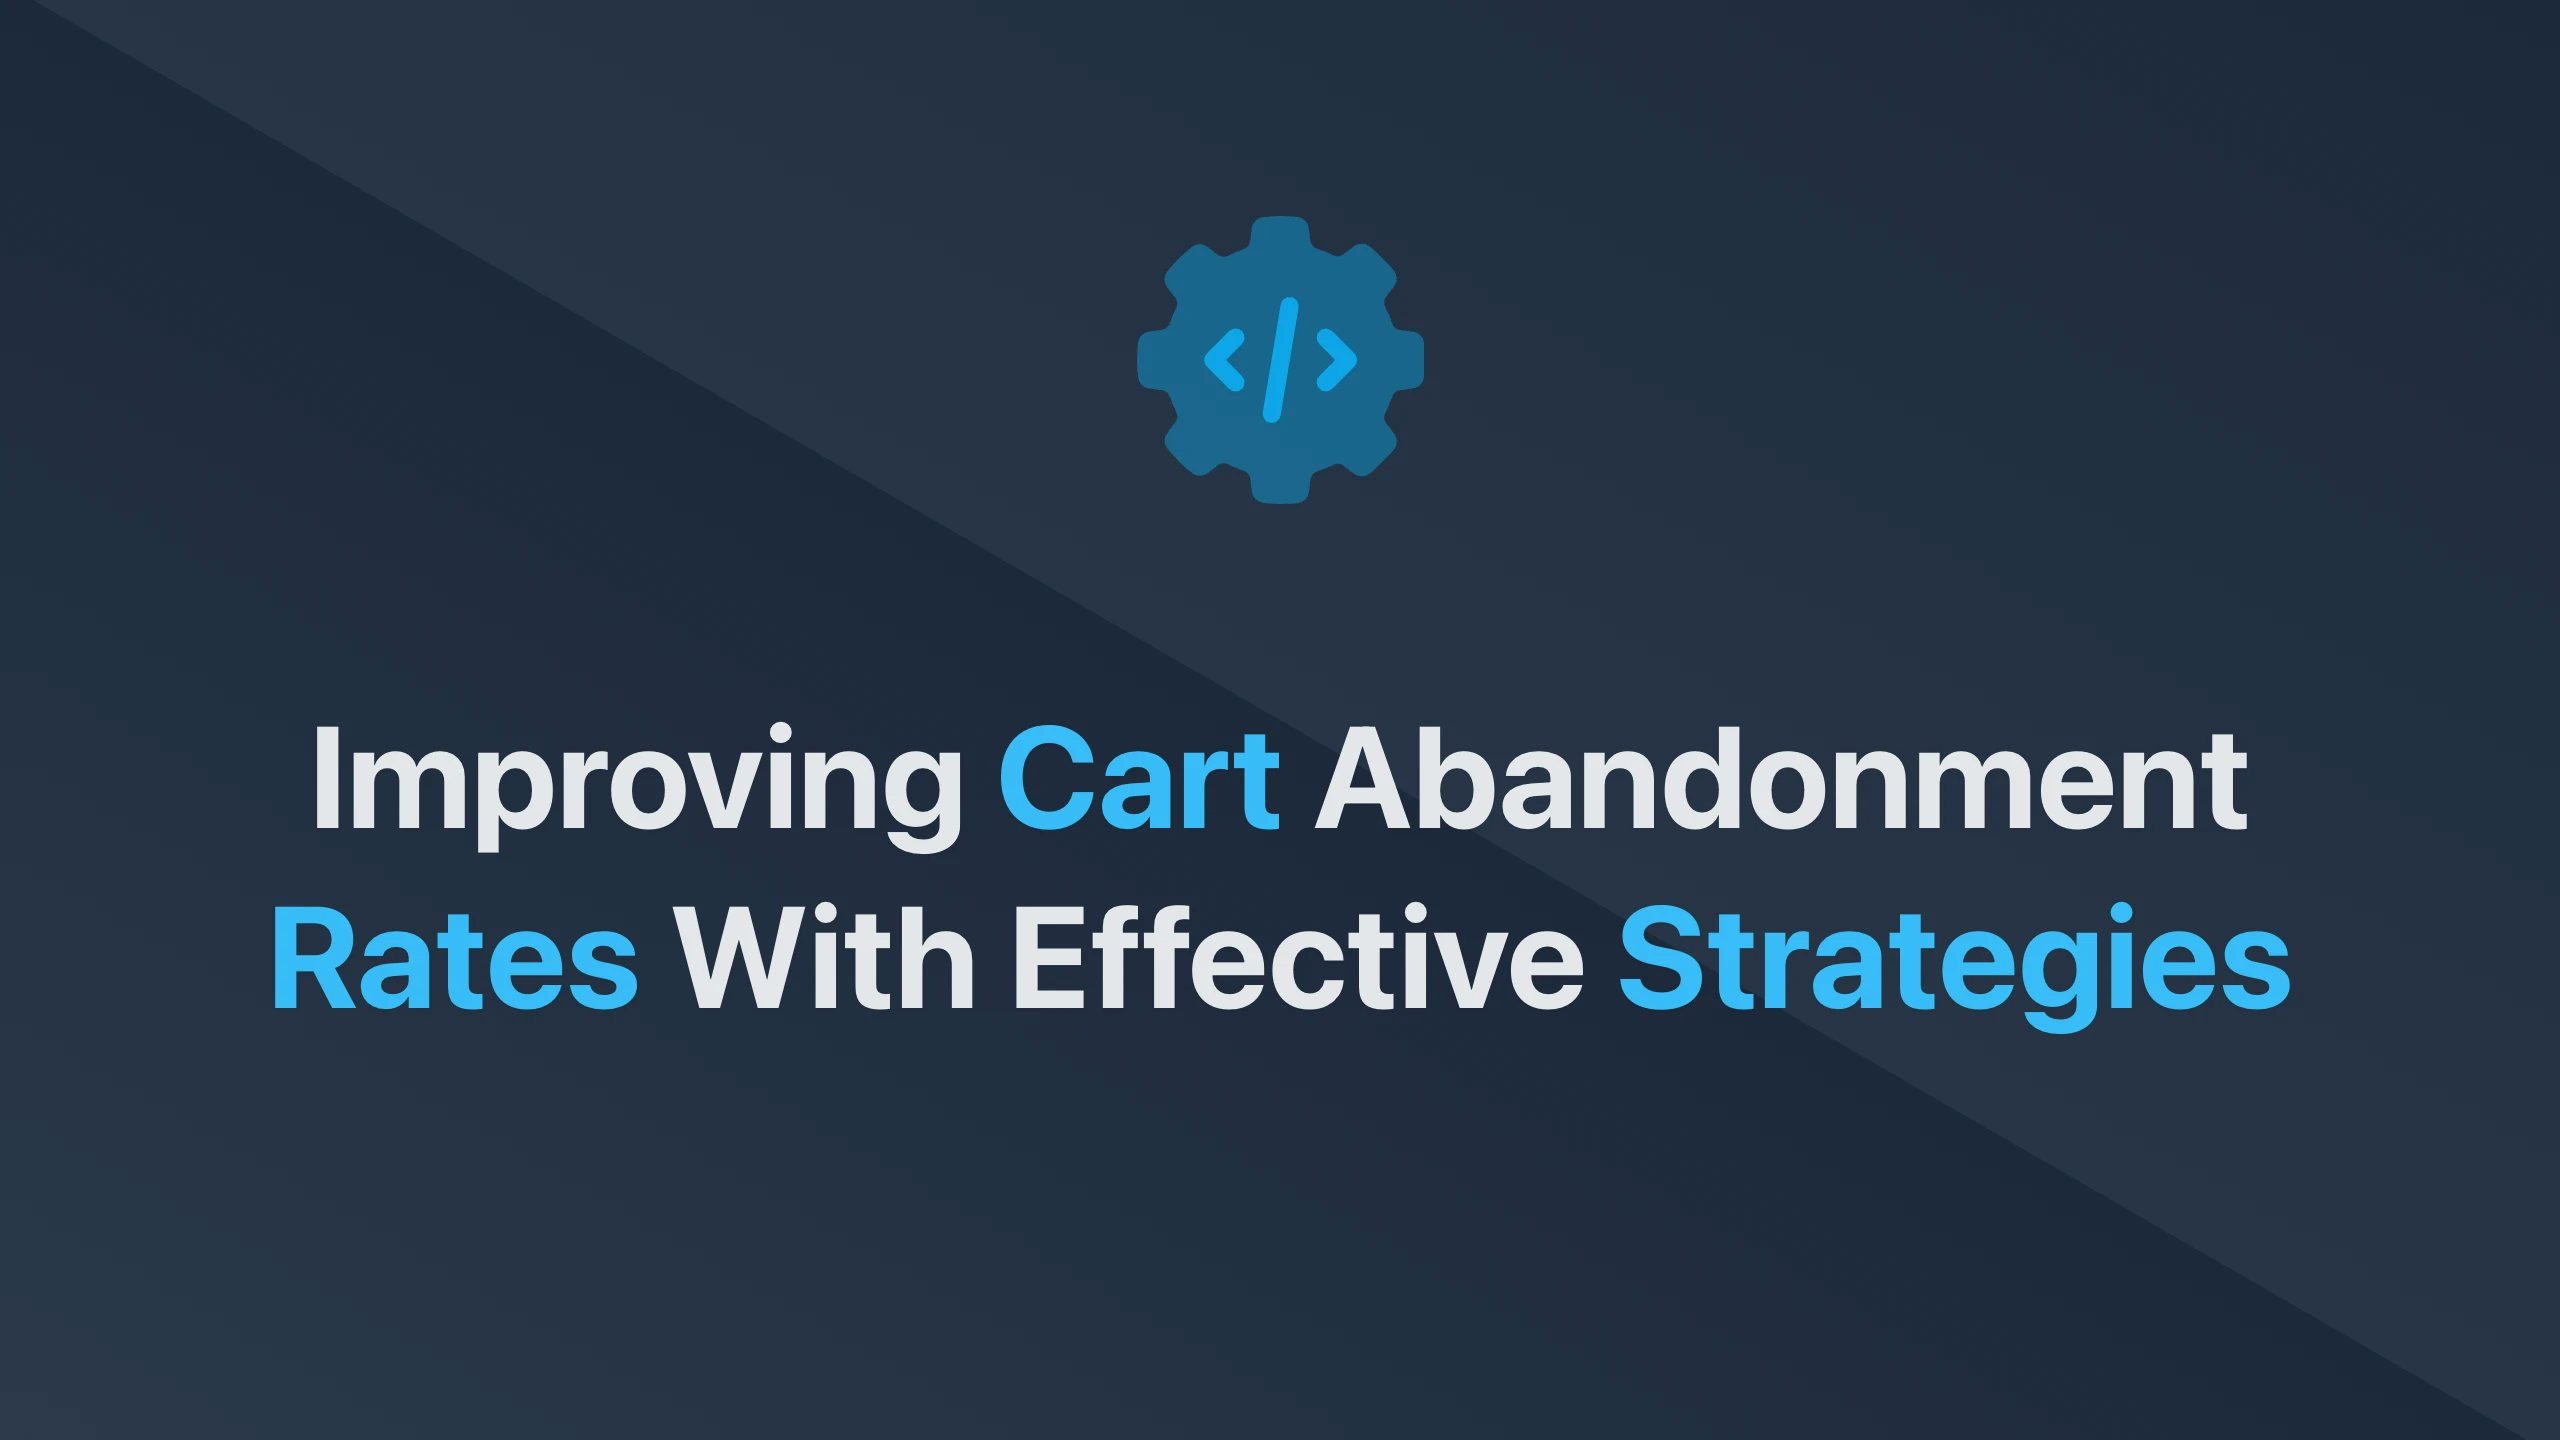 Cover Image for Improving Cart Abandonment Rates with Effective Strategies